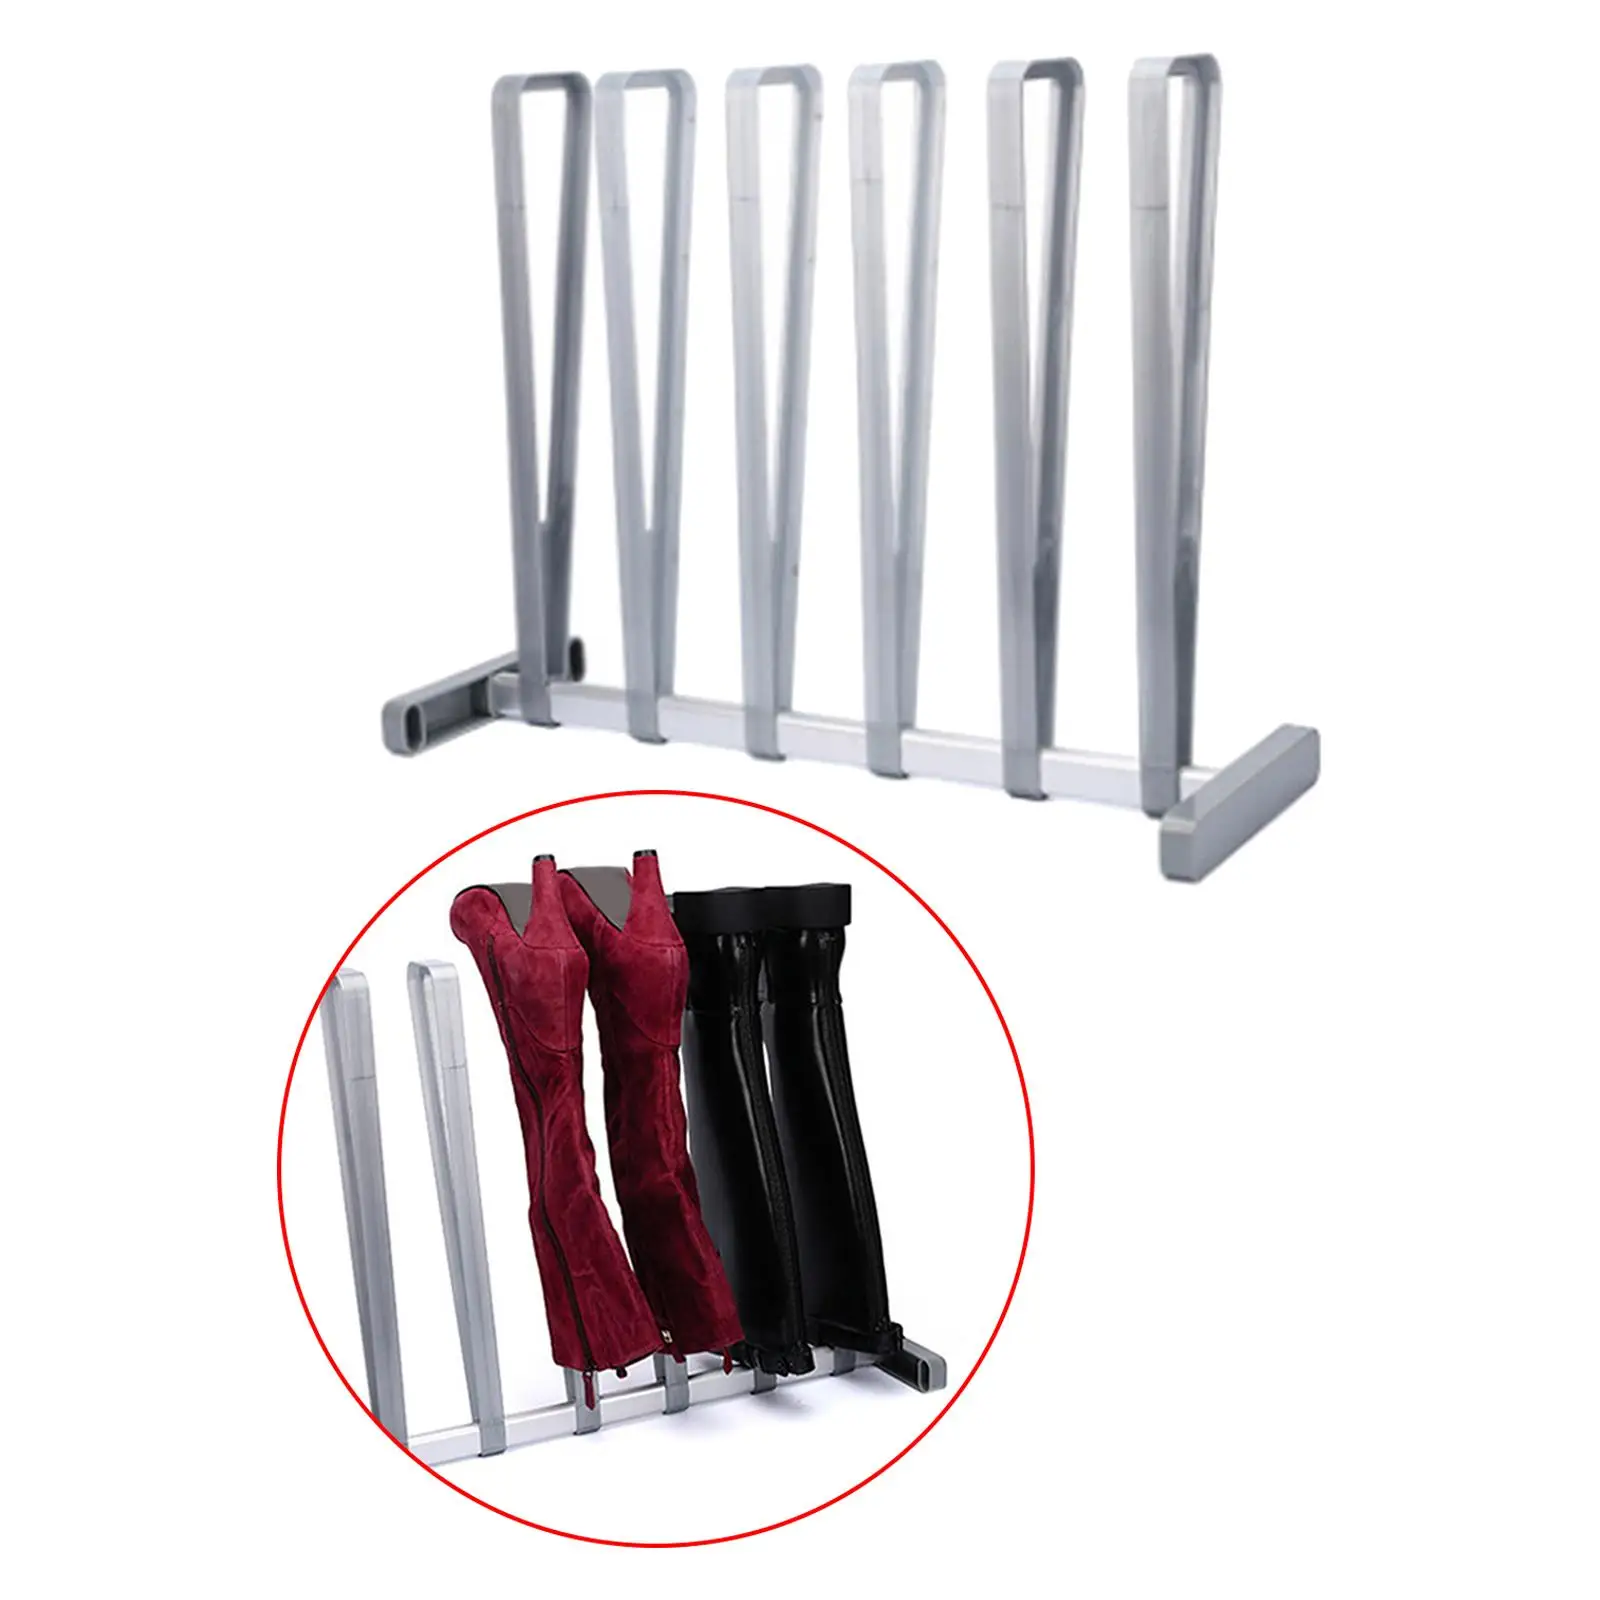 Boot Storage Rack Easy to Install Shoe Organizer for Bedroom